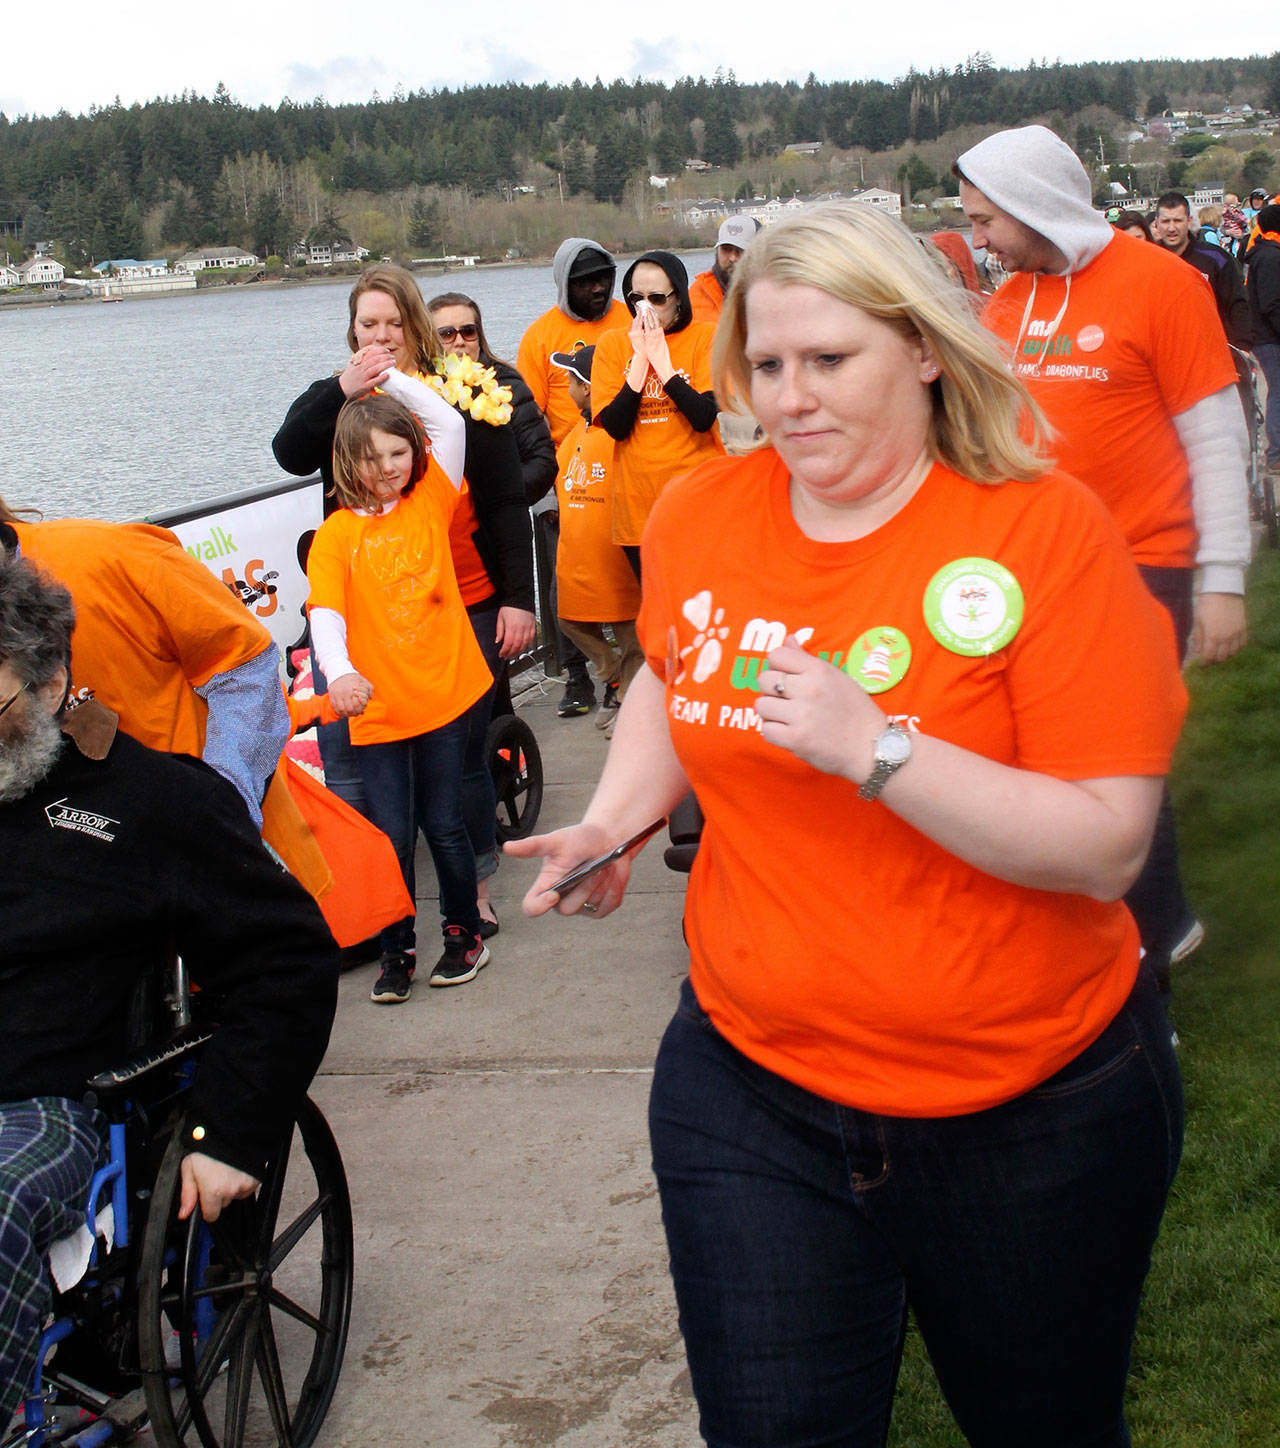 The 1.5-mile MS Walk: Poulsbo started at Muriel Iverson Williams Waterfront Park in downtown Poulsbo. MS Walk officials estimated there were some 300 walkers.(Terryl Asla/Kitsap News Group)